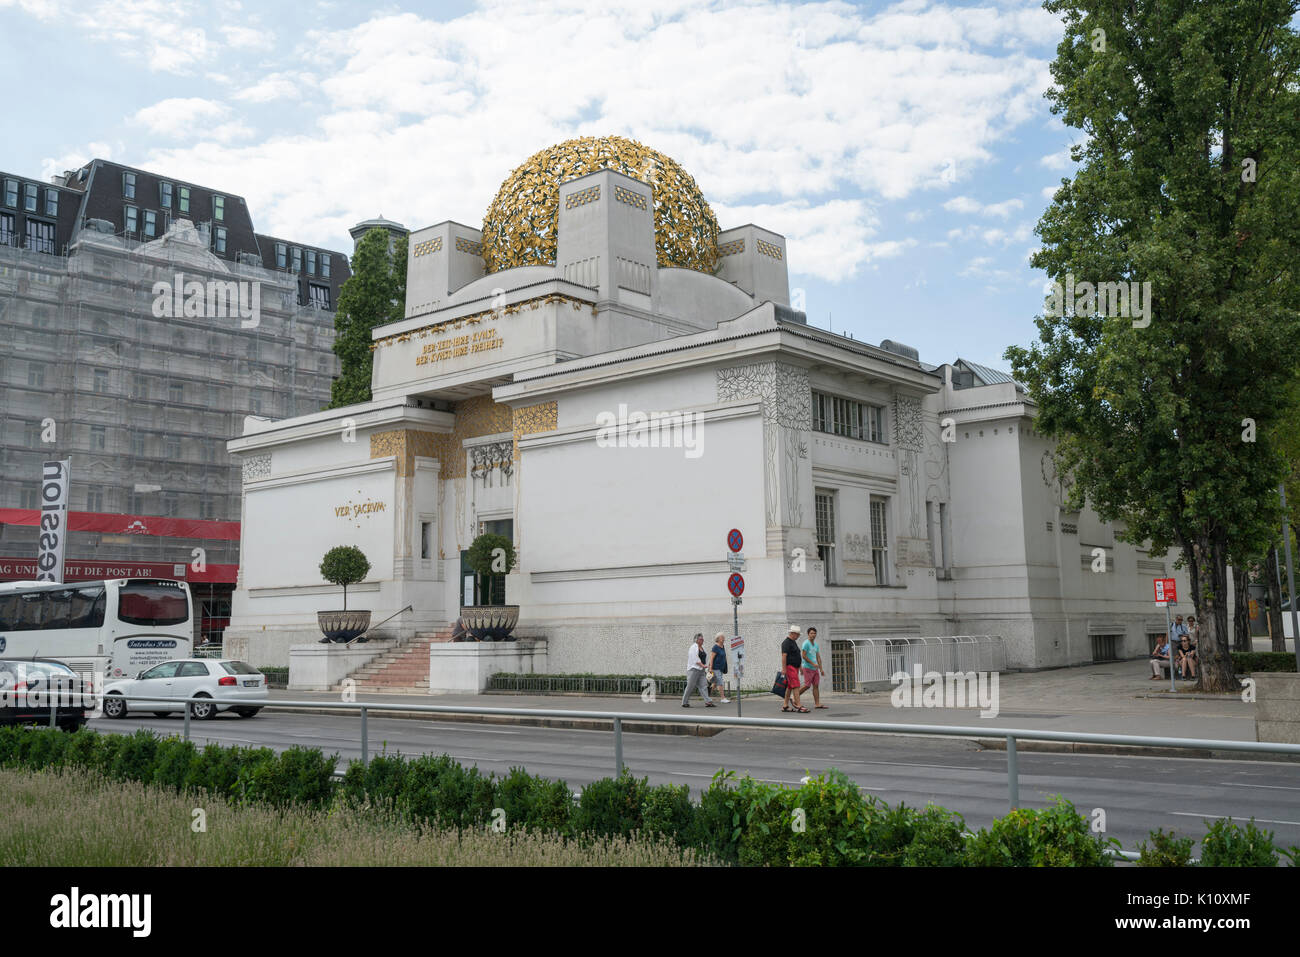 A view of the Vienna Secession museum building in Vienna Stock Photo